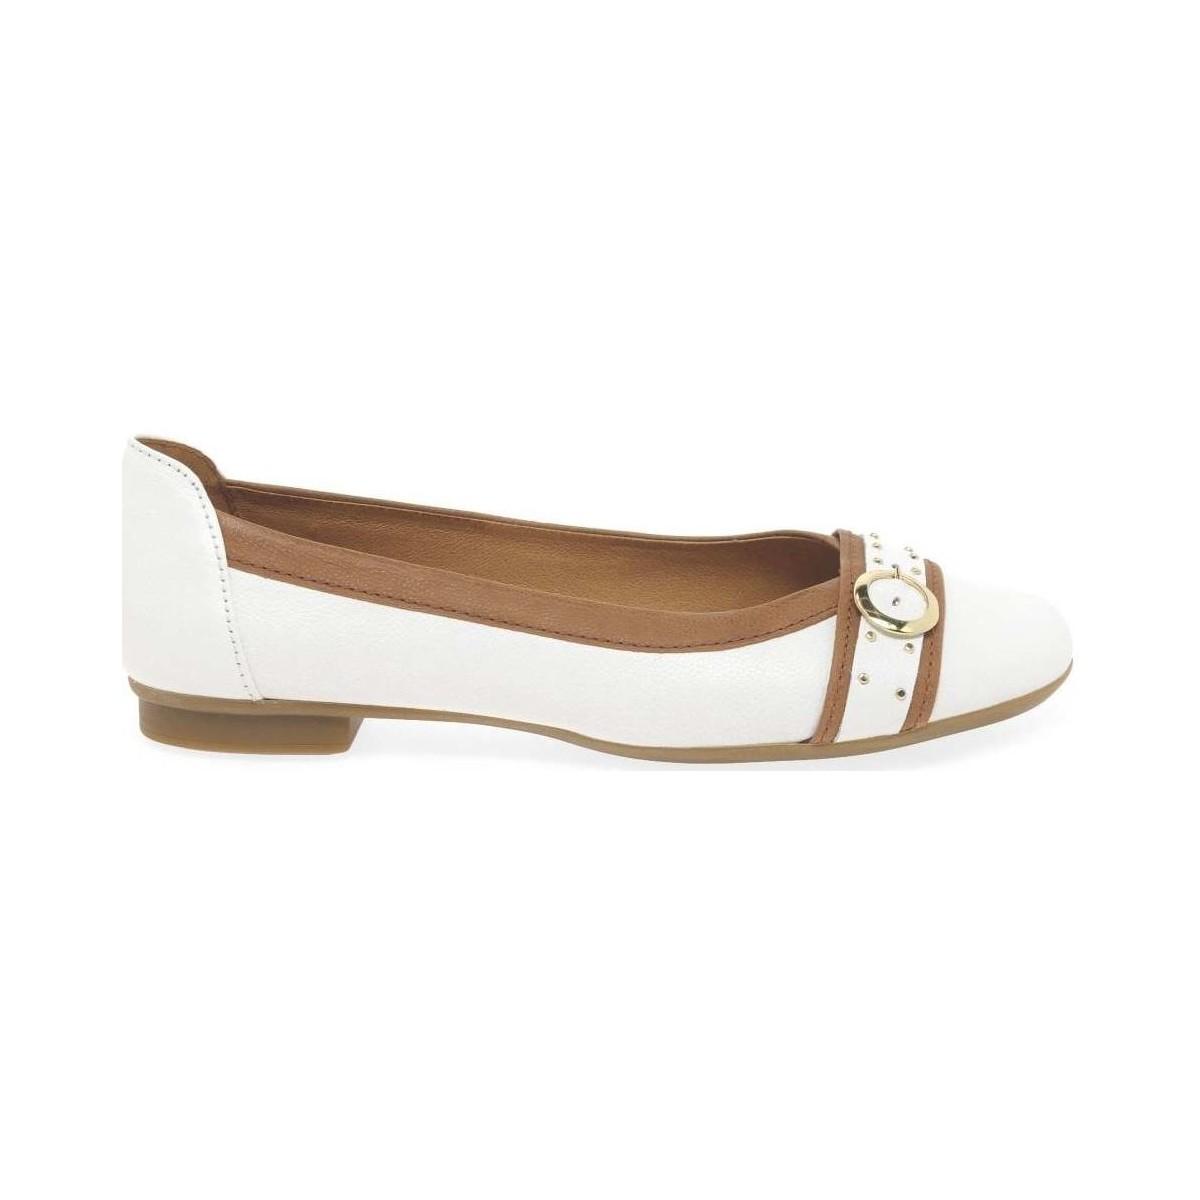 Gabor Suede Michelle Womens Casual Stud Buckle Pumps in White/Cognac (White)  - Lyst